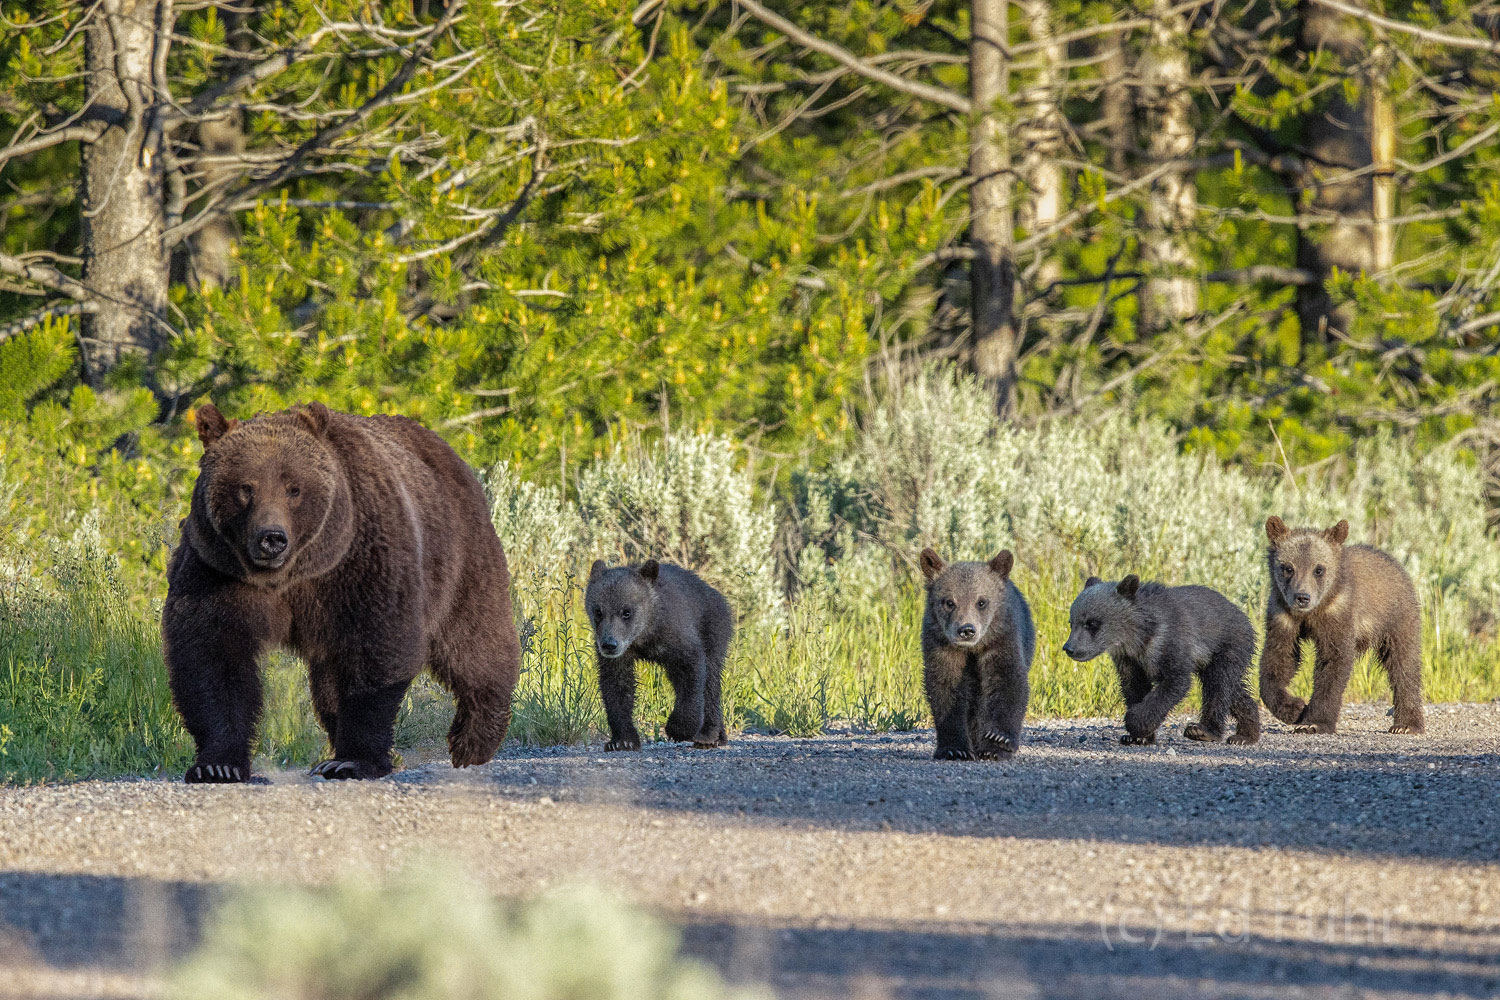 Grizzly 399 leads her quad cubs down a quiet dirt road.